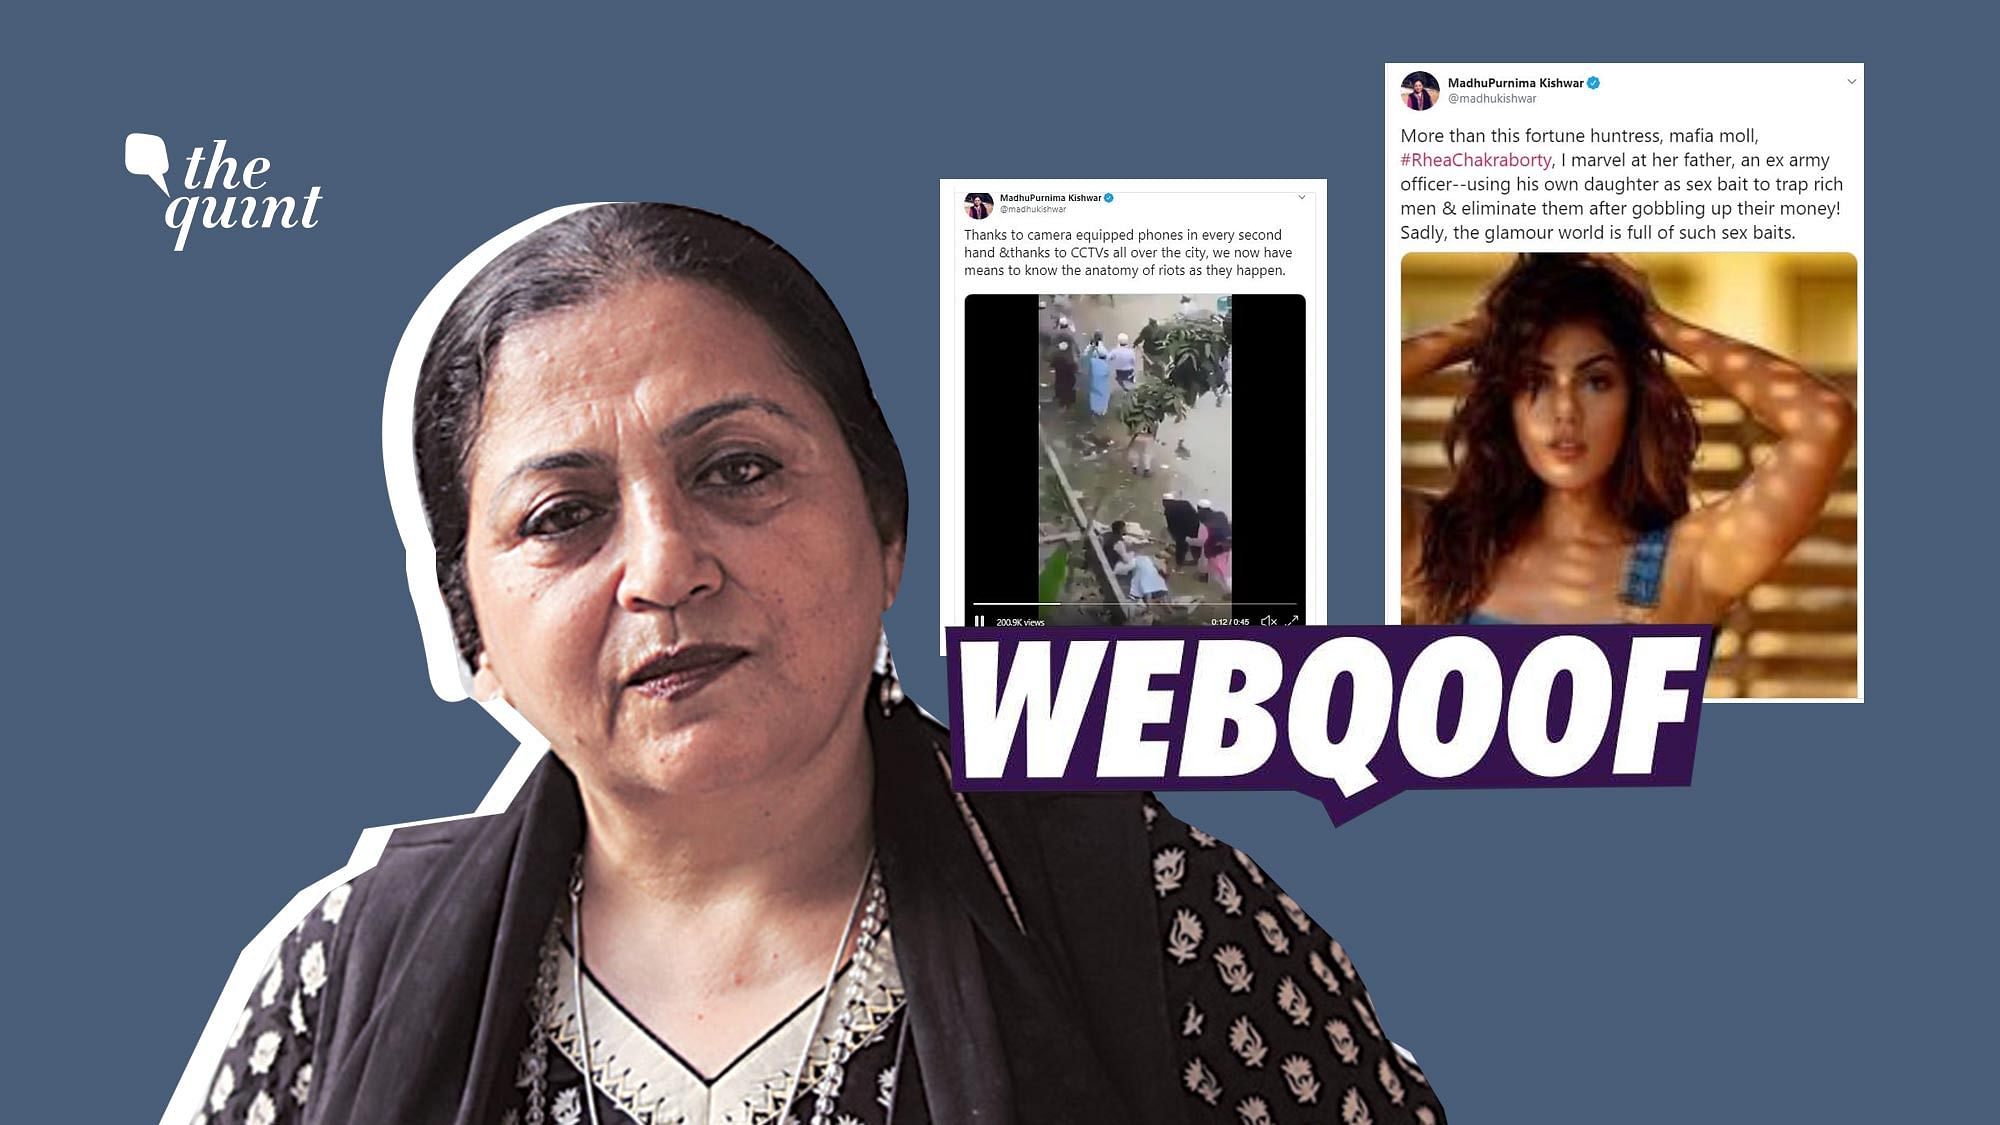 Madhu Kishwar, who made headlines for her misogynistic remarks against Rhea, has a history of sharing misinformation.